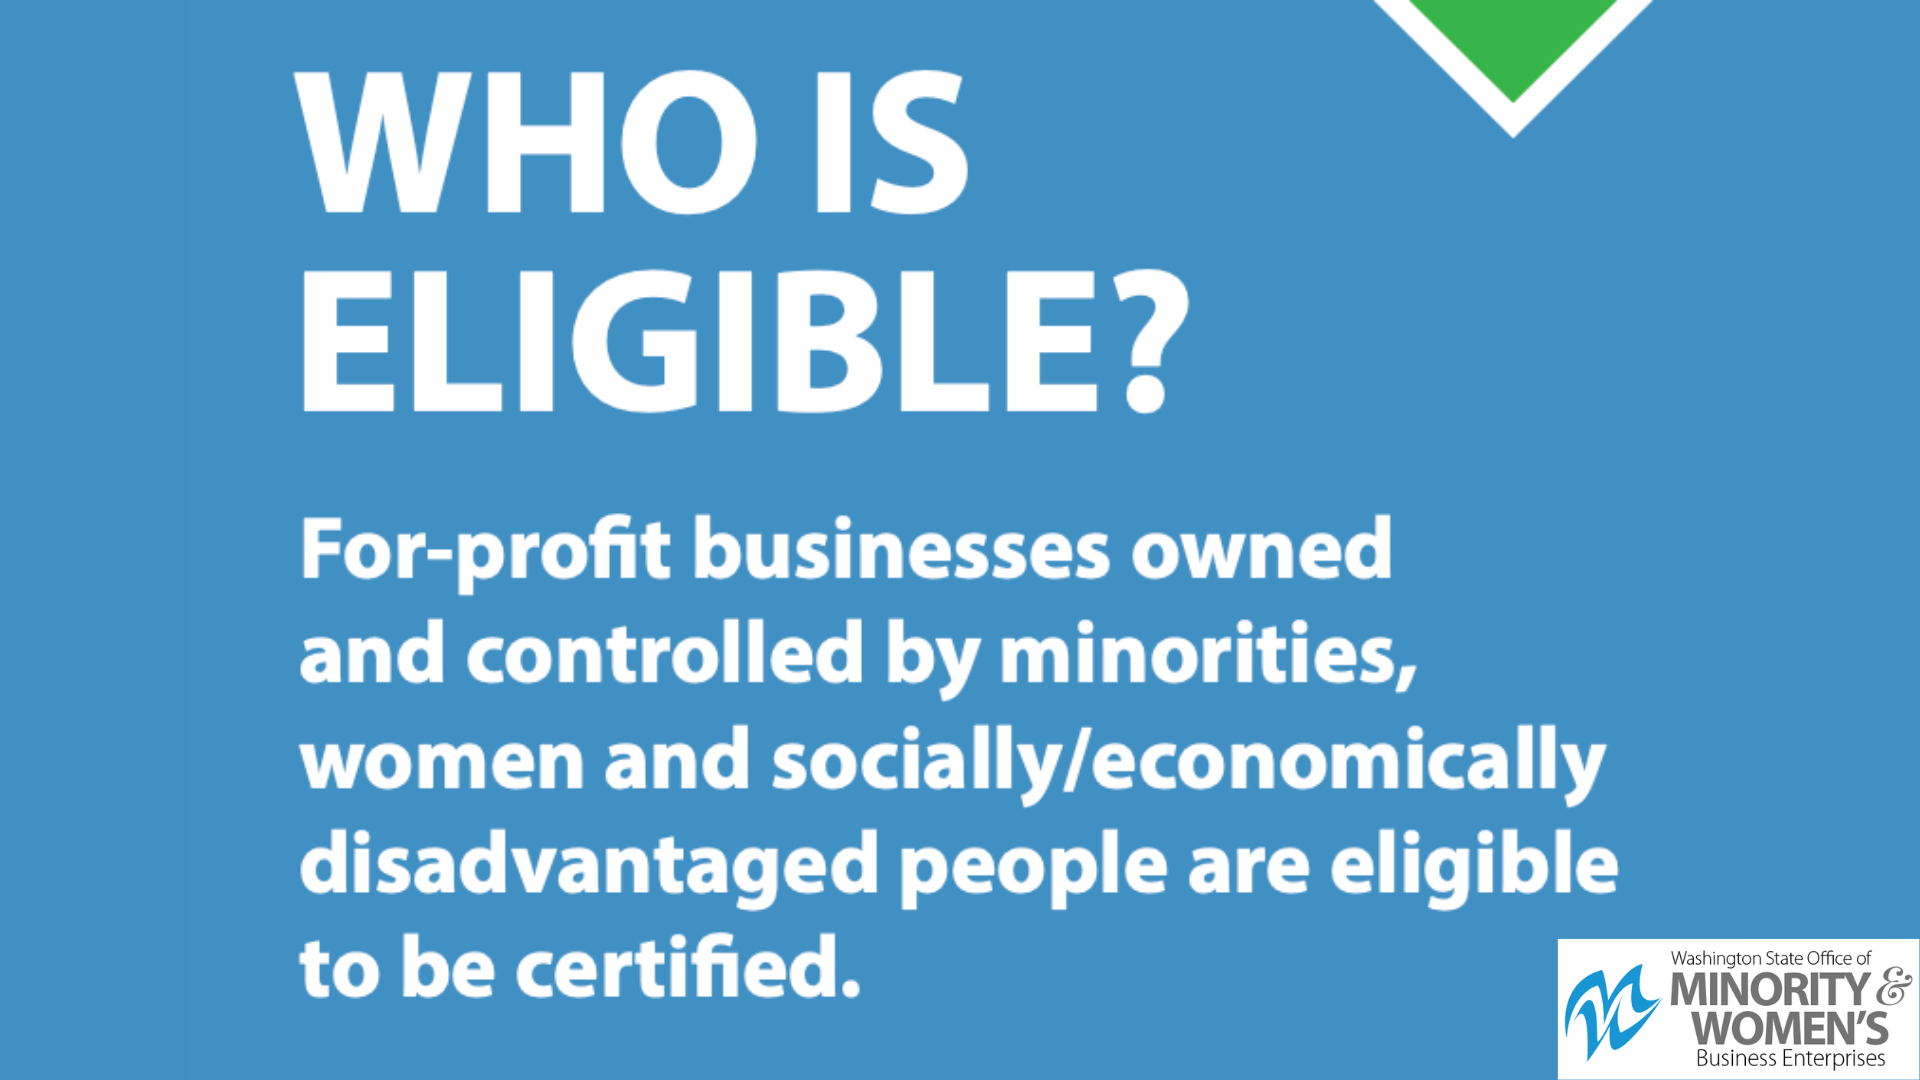 Graphic titled 'Who is Eligible?' from the Washington State Office of Minority & Women's Business Enterprises. The image states that for-profit businesses owned and controlled by minorities, women, and socially/economically disadvantaged people are eligible to be certified. Includes the organization's logo in the bottom right corner.